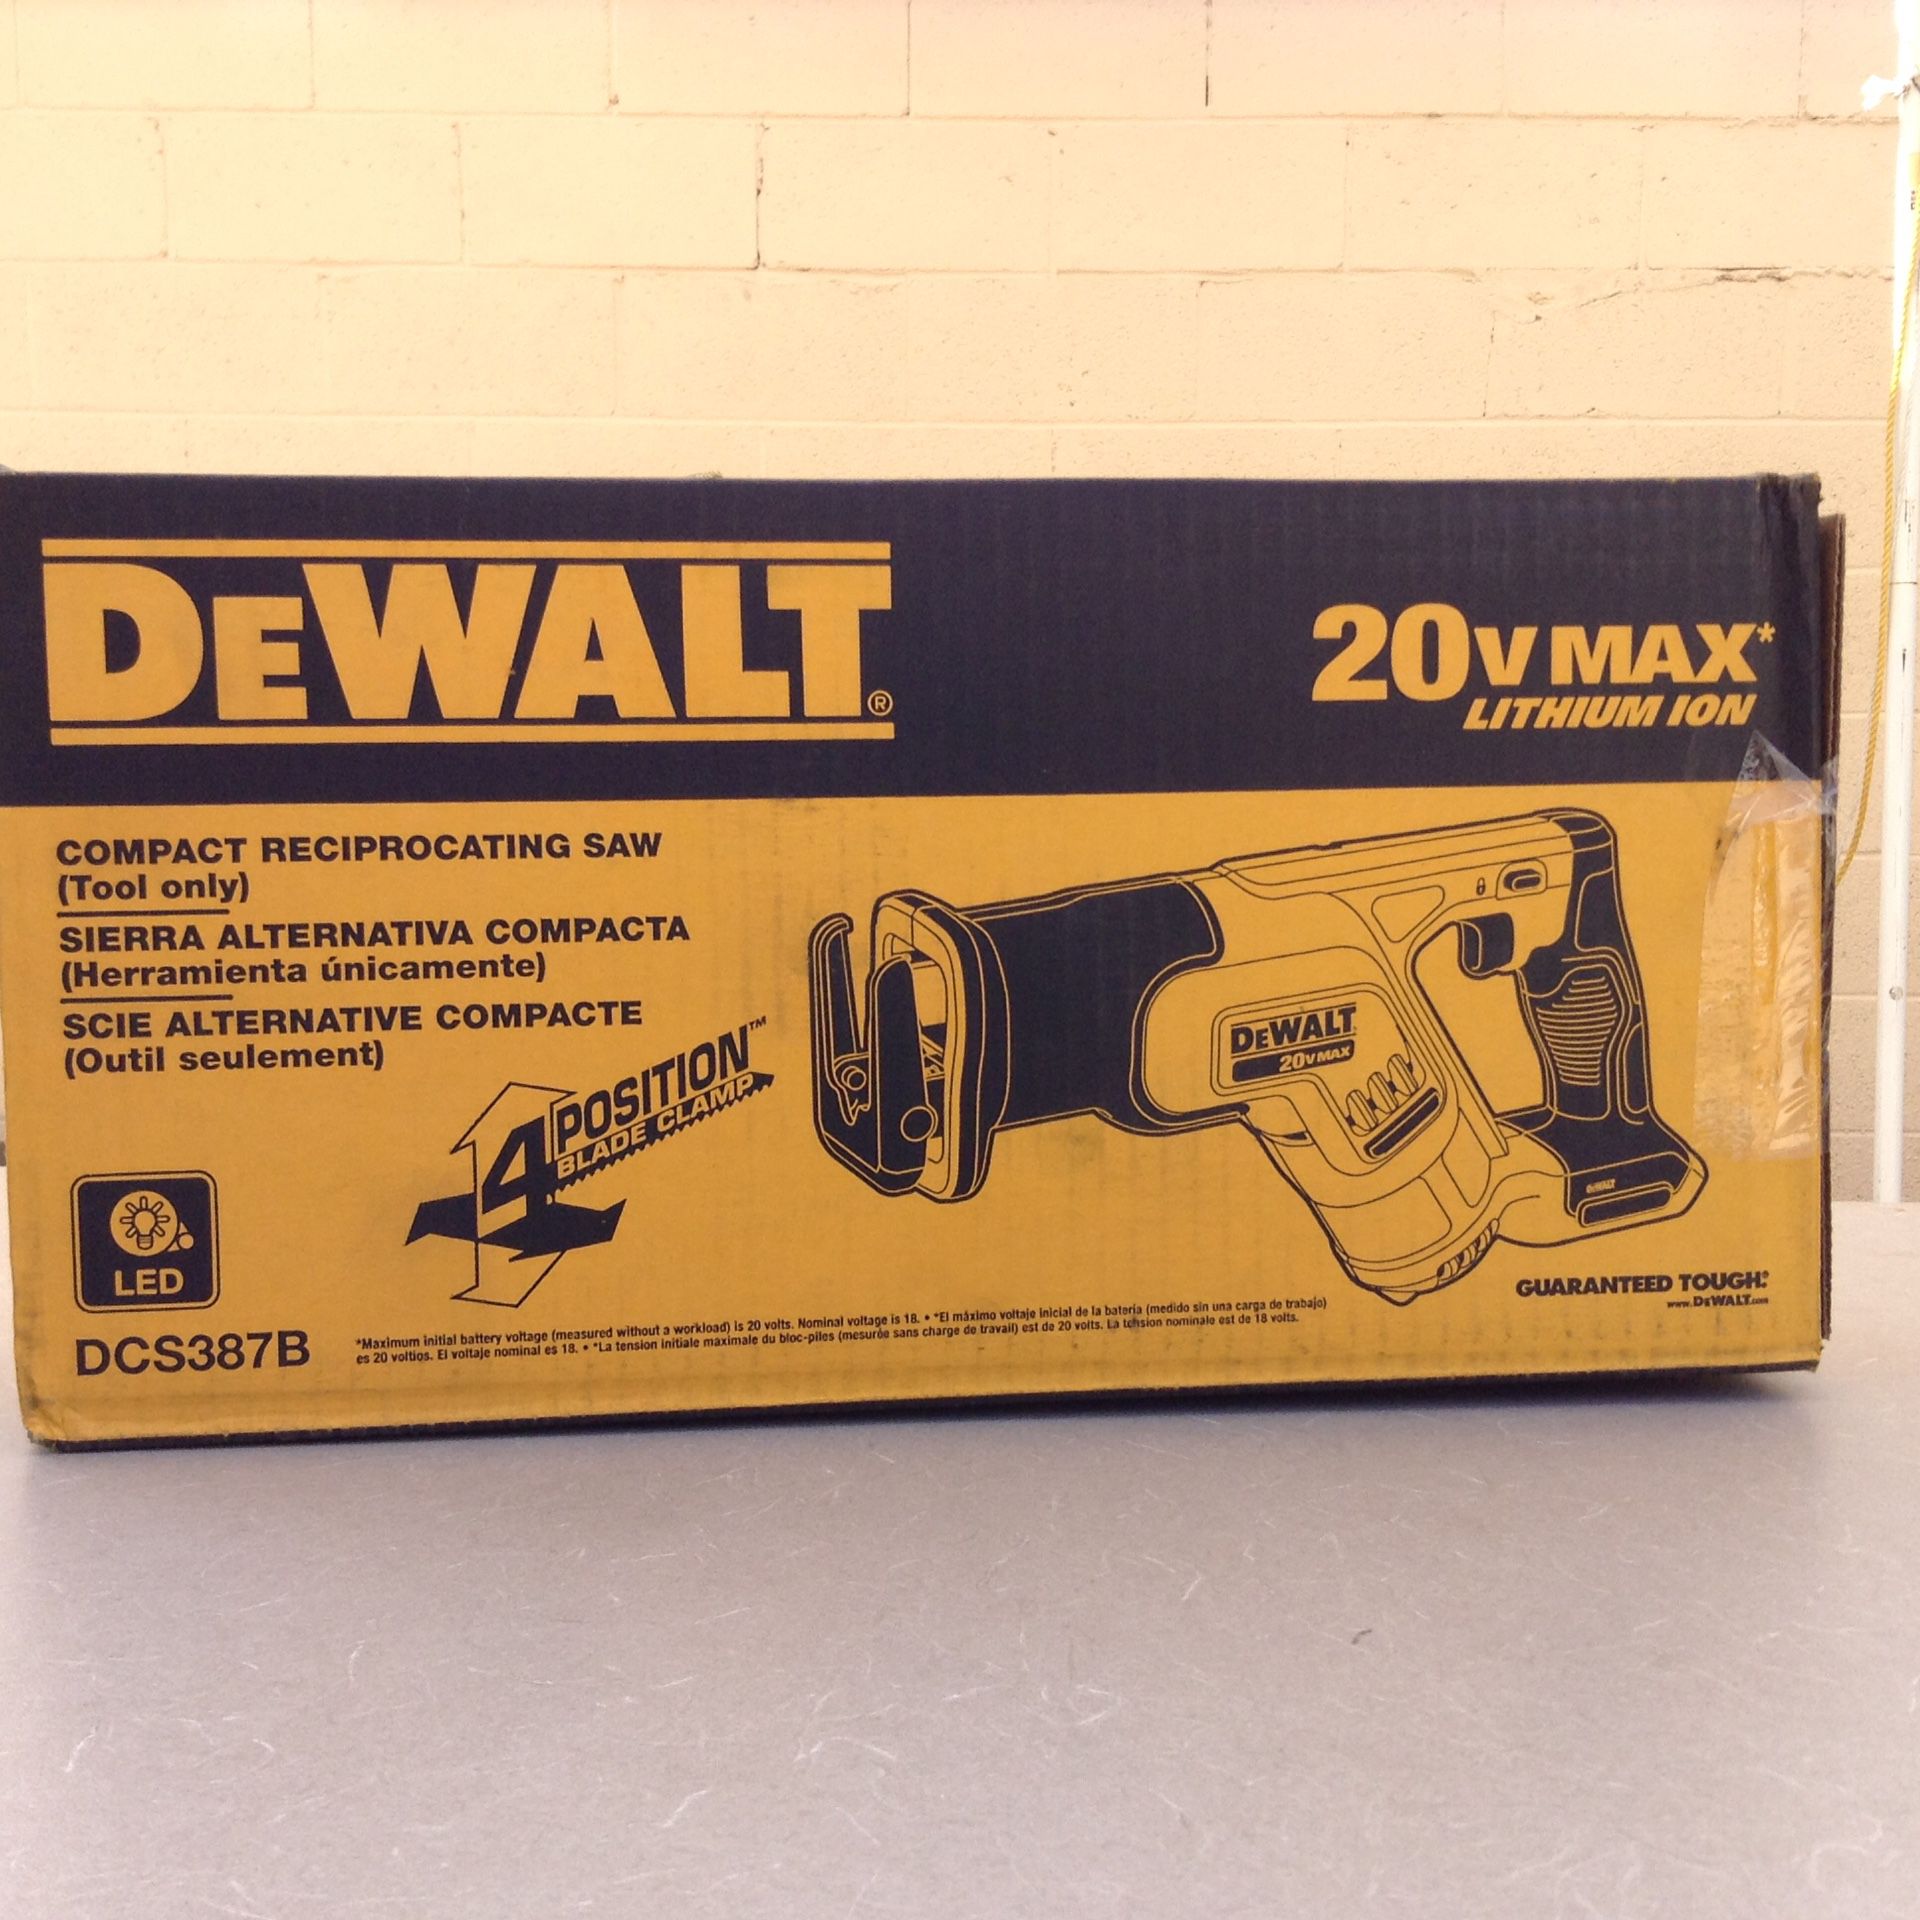 DEWALT DCS387B 20-VOLT MAX COMPACT RECIPROCATING SAW POSITION BLADE CLAMP  (TOOL ONLY) for Sale in Long Beach, CA OfferUp